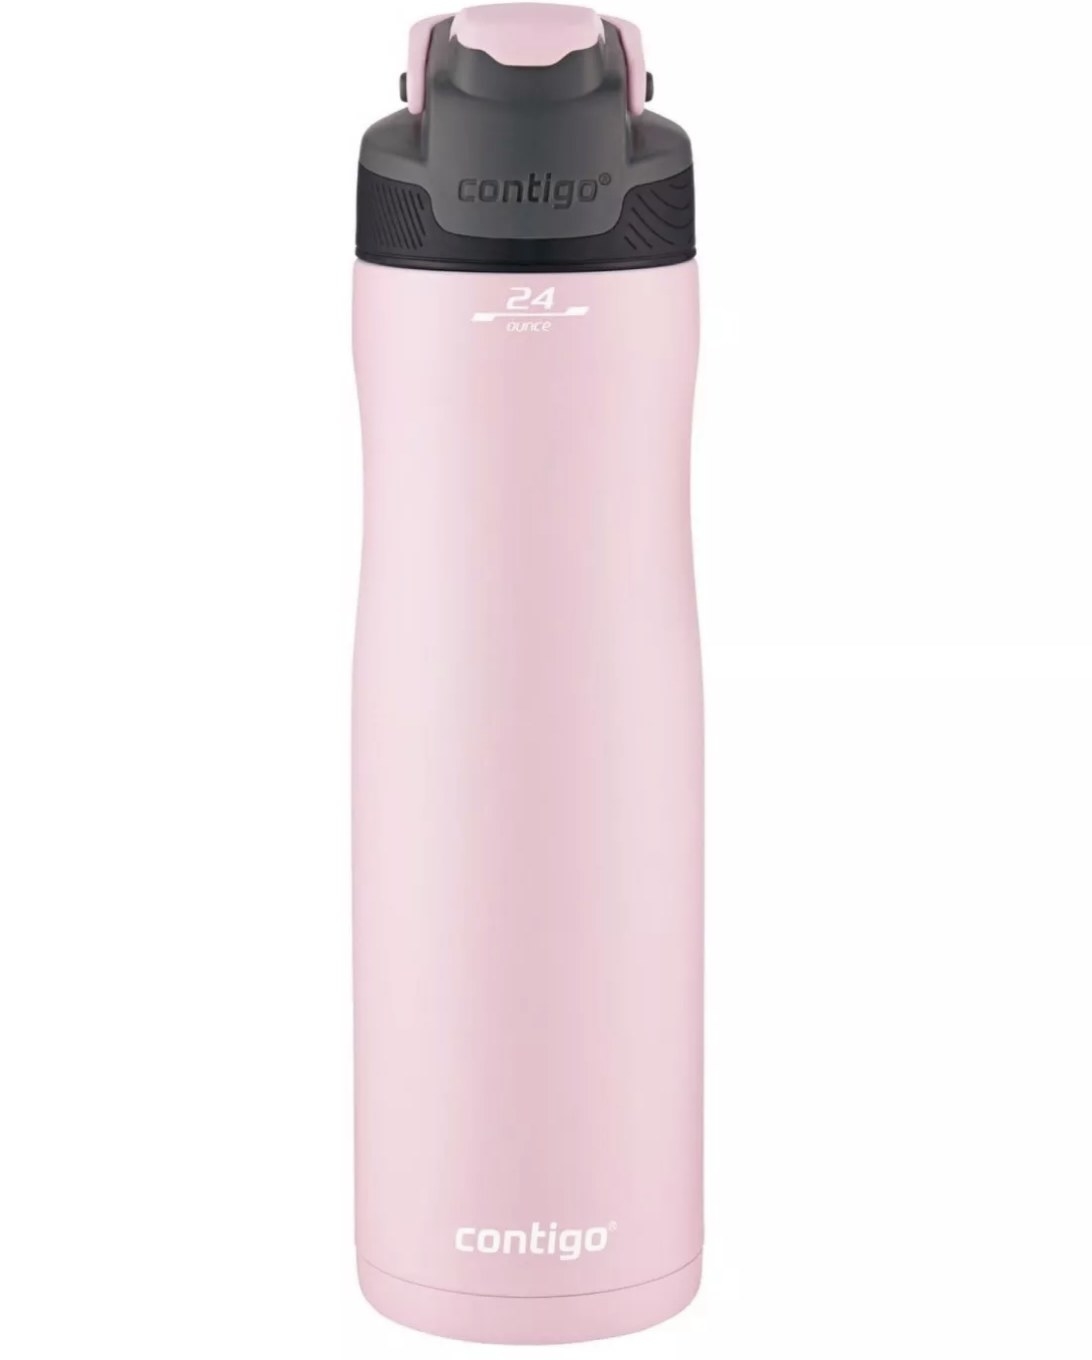 The bottle in pink, featuring a protective spout cover